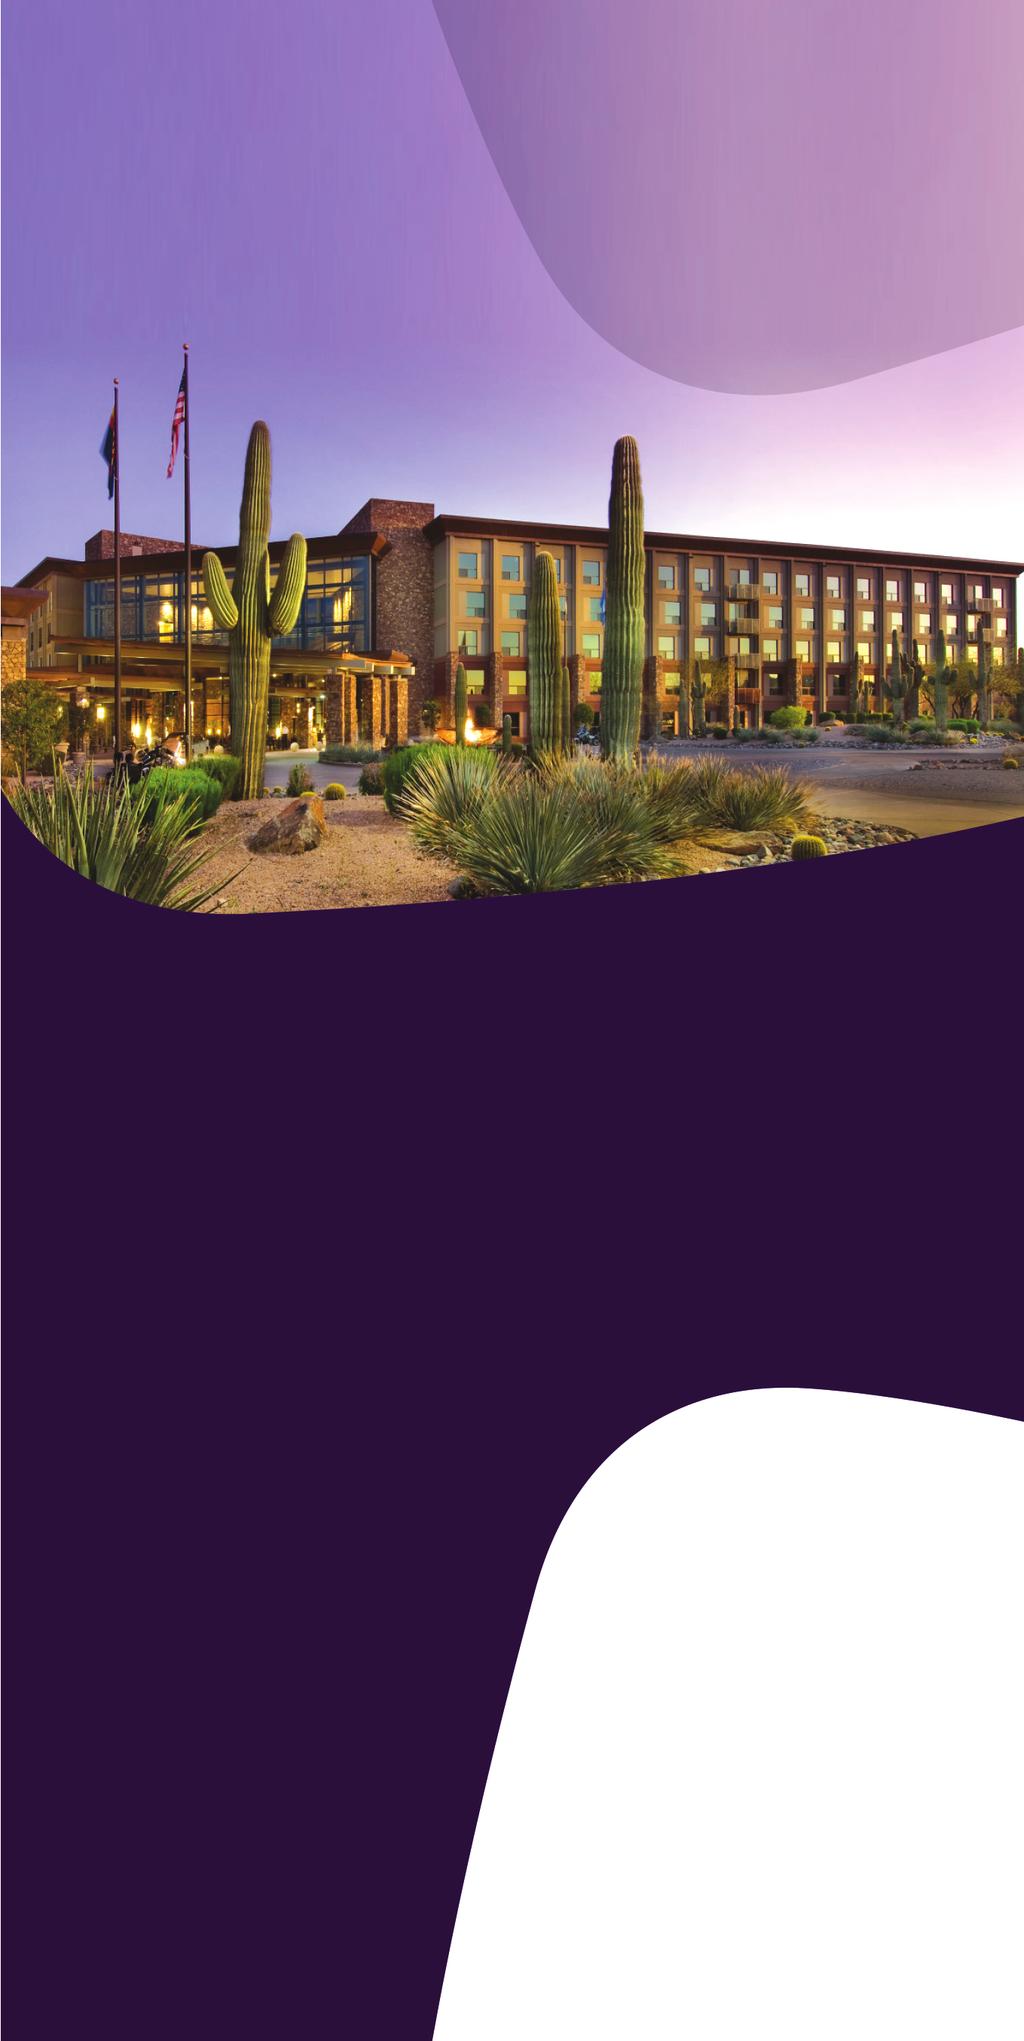 Discover the beauty, tranquility, and culture of Arizona s captivating Sonoran Desert at the AAA Four Diamond We-Ko-Pa Resort & Conference Center.